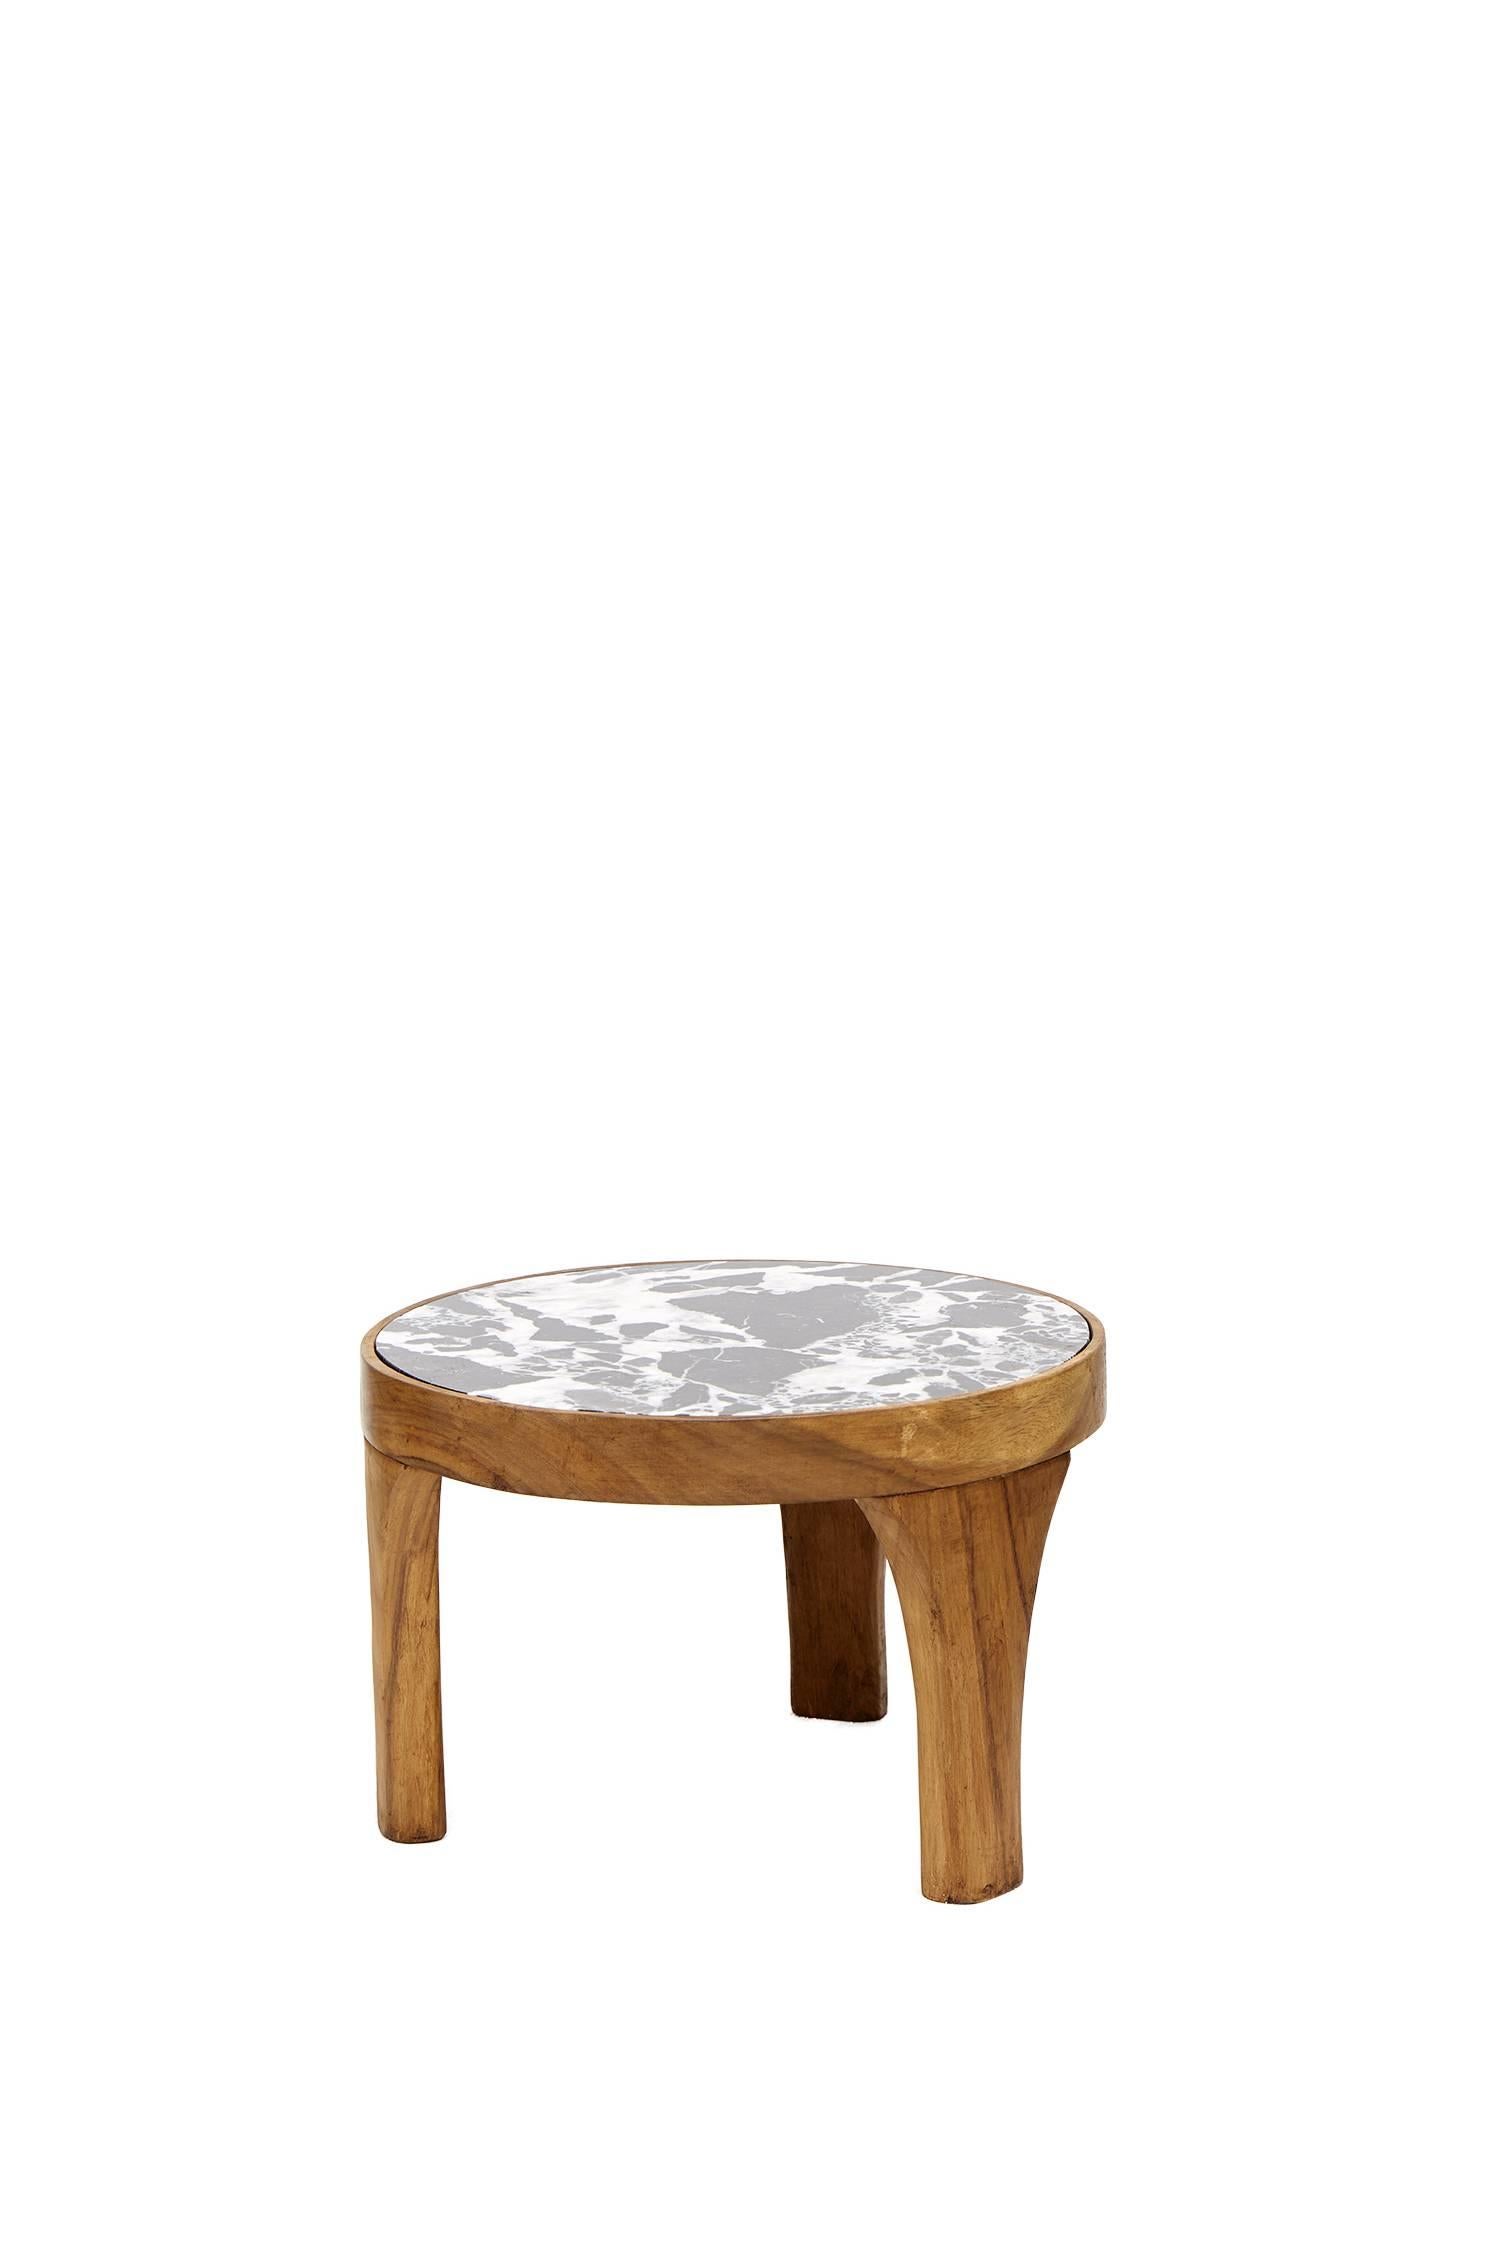 This set of two handcrafted Marcelino center tables is a unique creation by Leon Leon Design from Mexico City. Both are made of solid tropical Parota wood and hand-carved, the big one comes with a black and white marble tabletop.

Dimensions